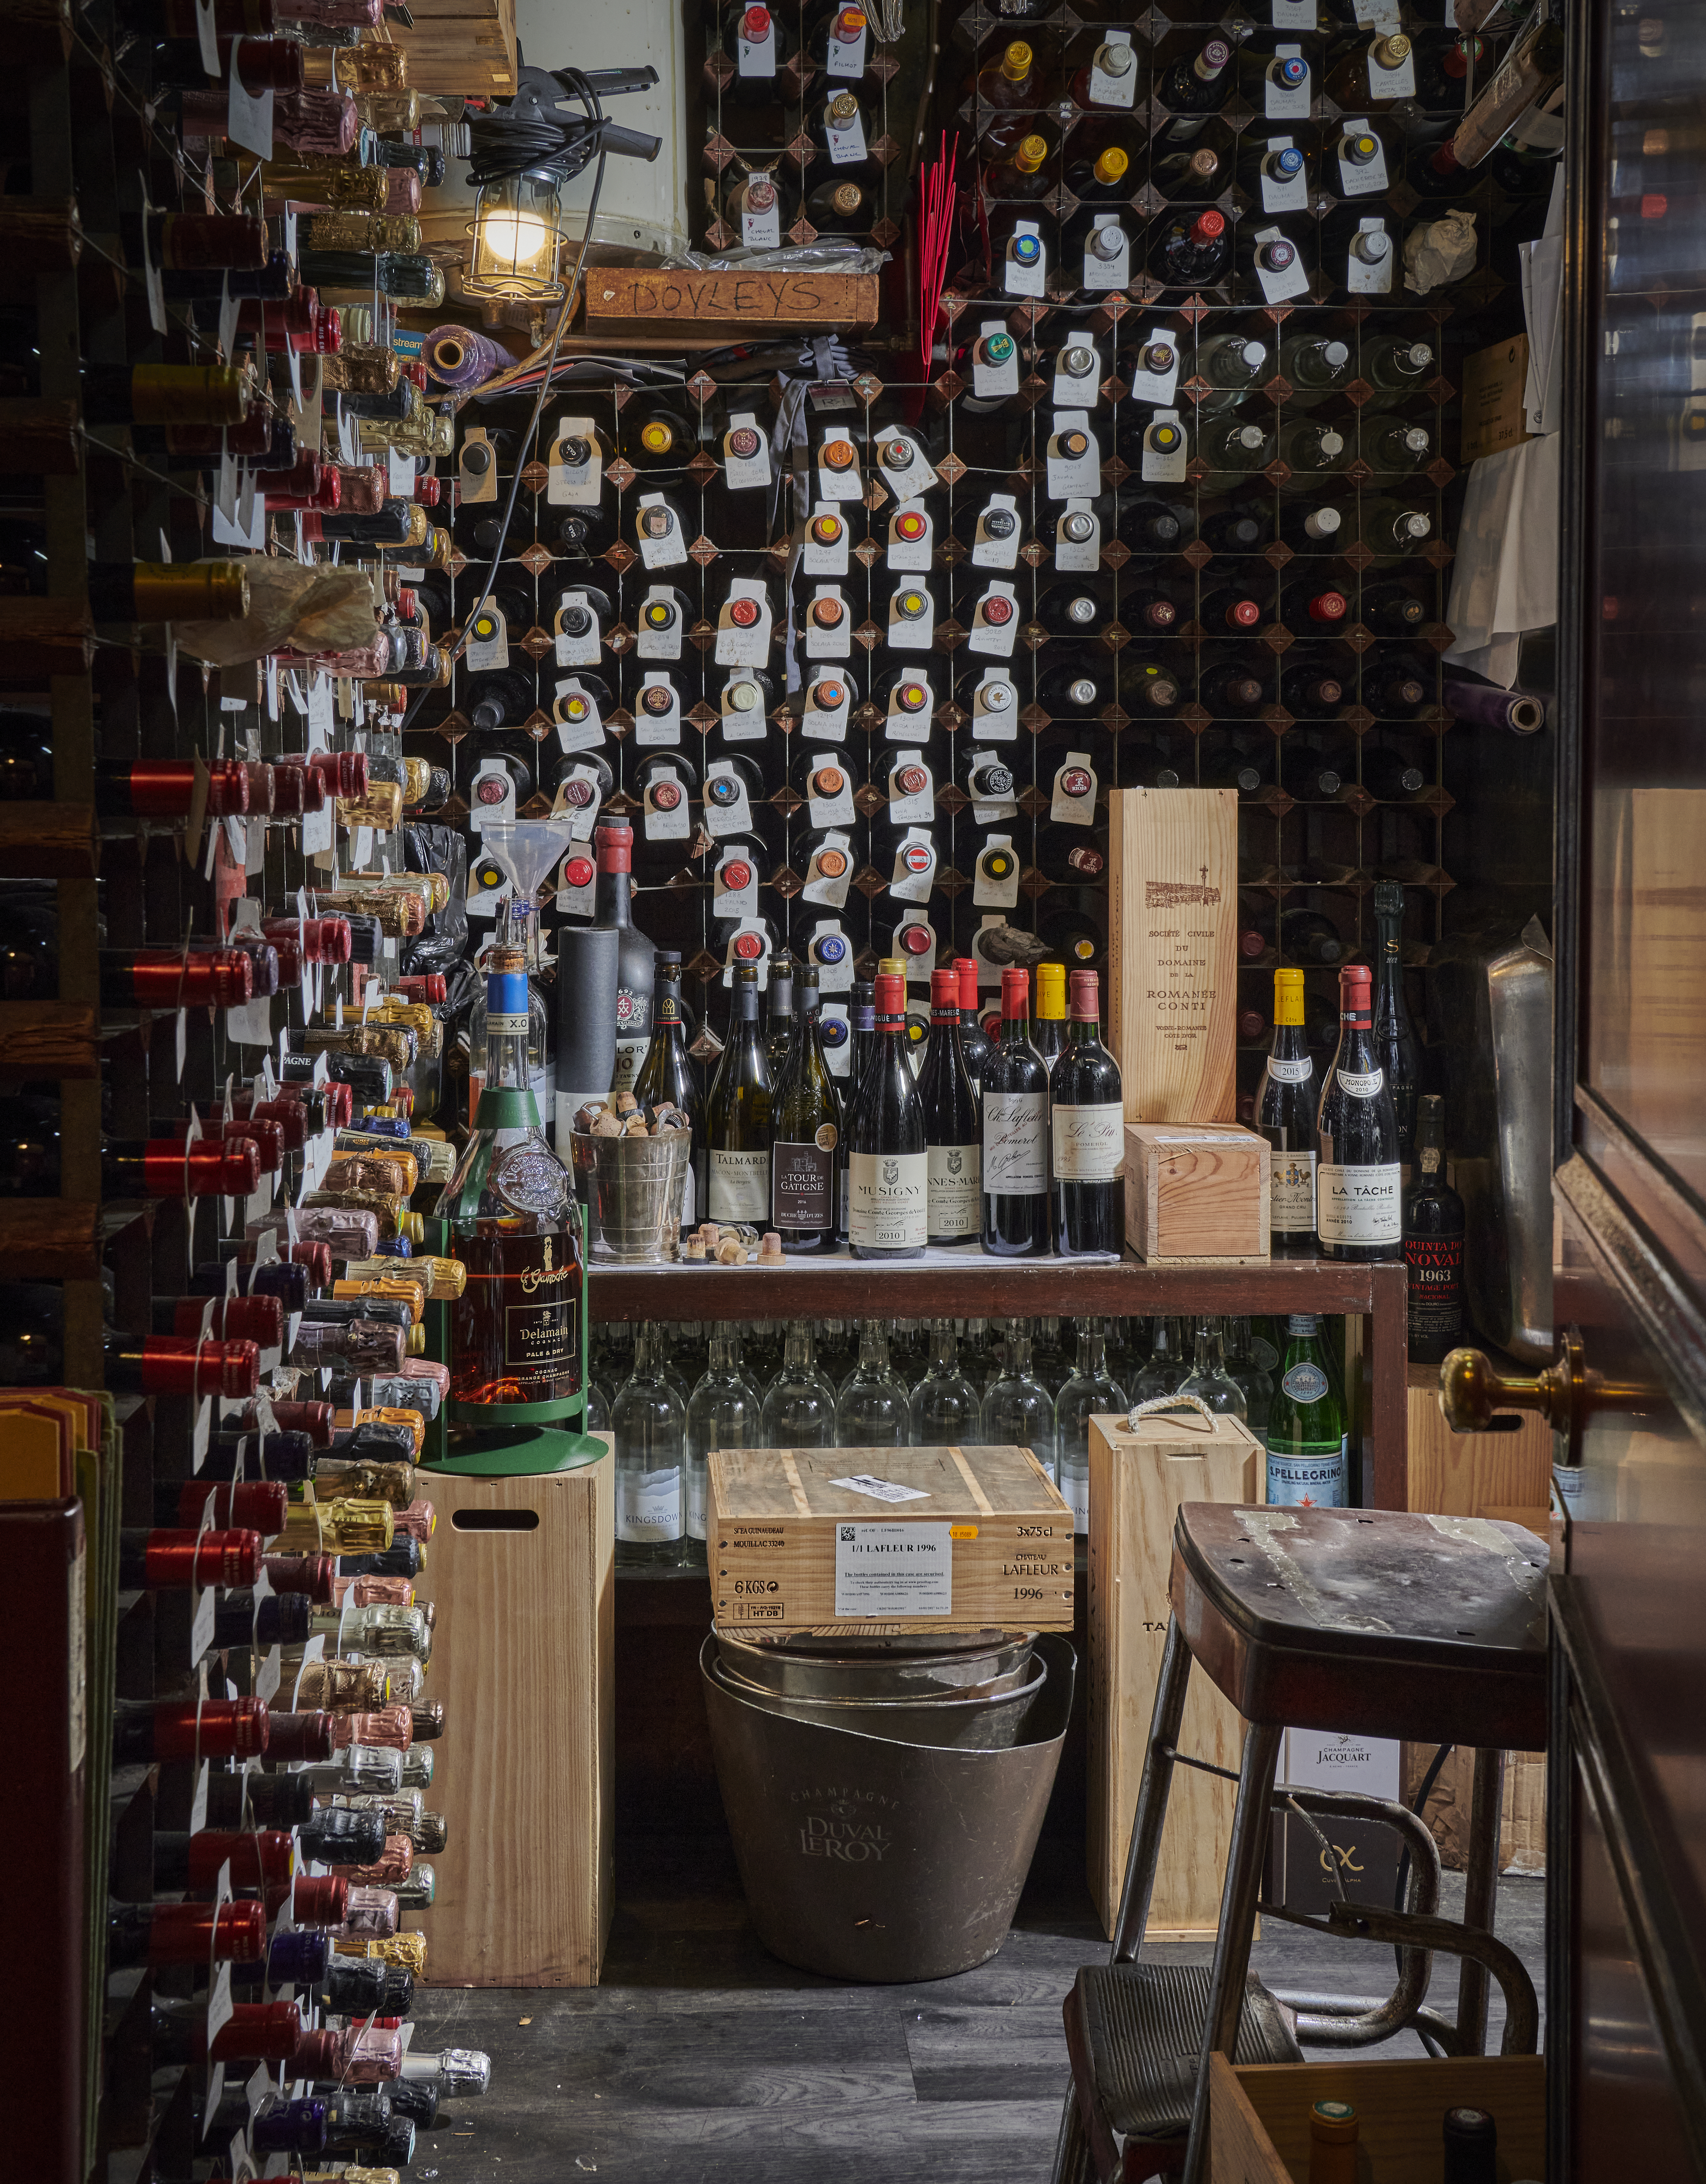 Le Gavroche had an extensive and specialised wine cellar